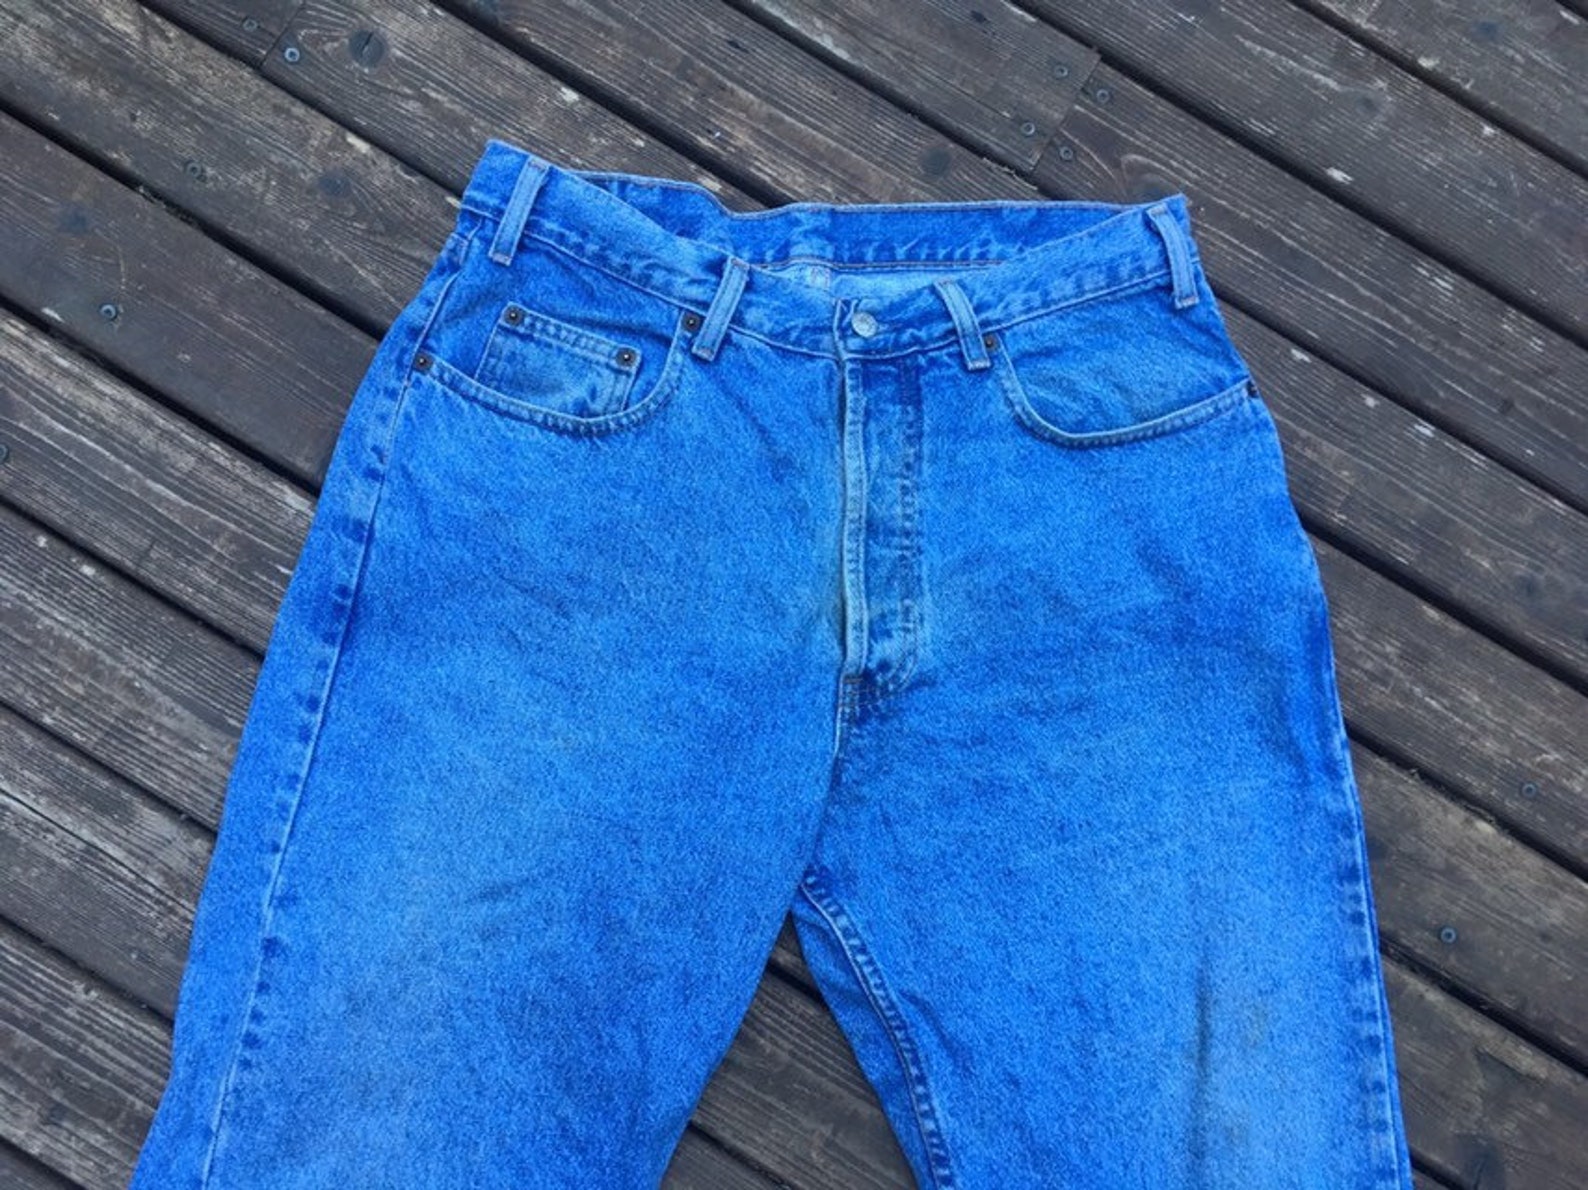 SALE 34 Button Fly Jeans Gap 80s 35 33 32 L Large XL Extra - Etsy